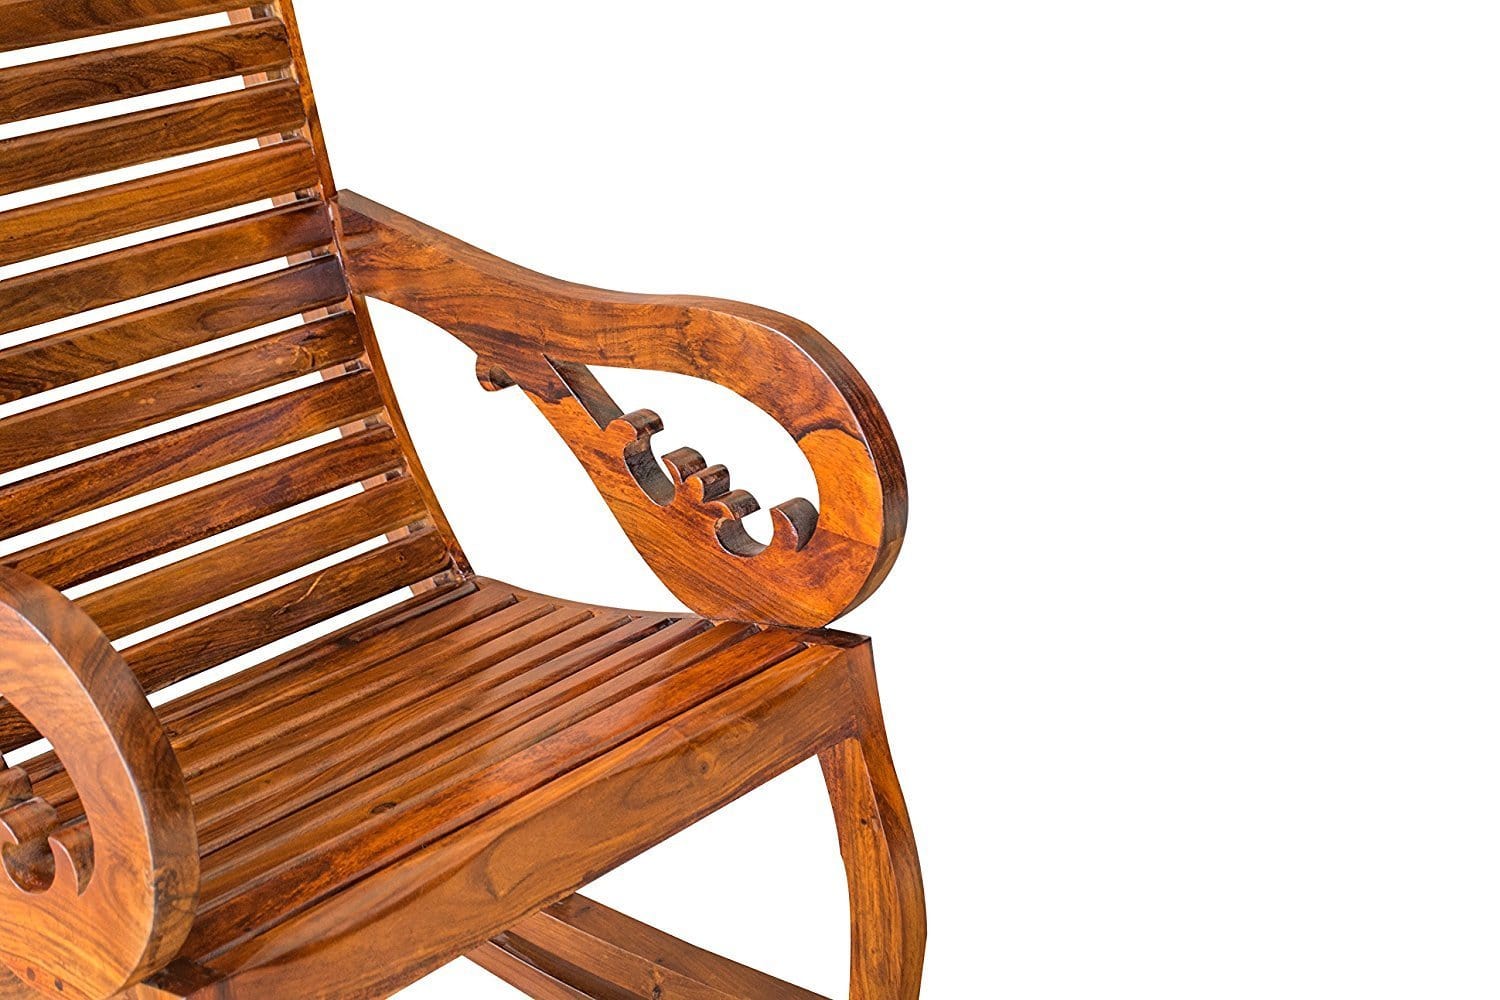 Wooden Royal Rocking Chair Wood Rocking Chair in Mahogany SPL Finish for Living Room Lounge Garden